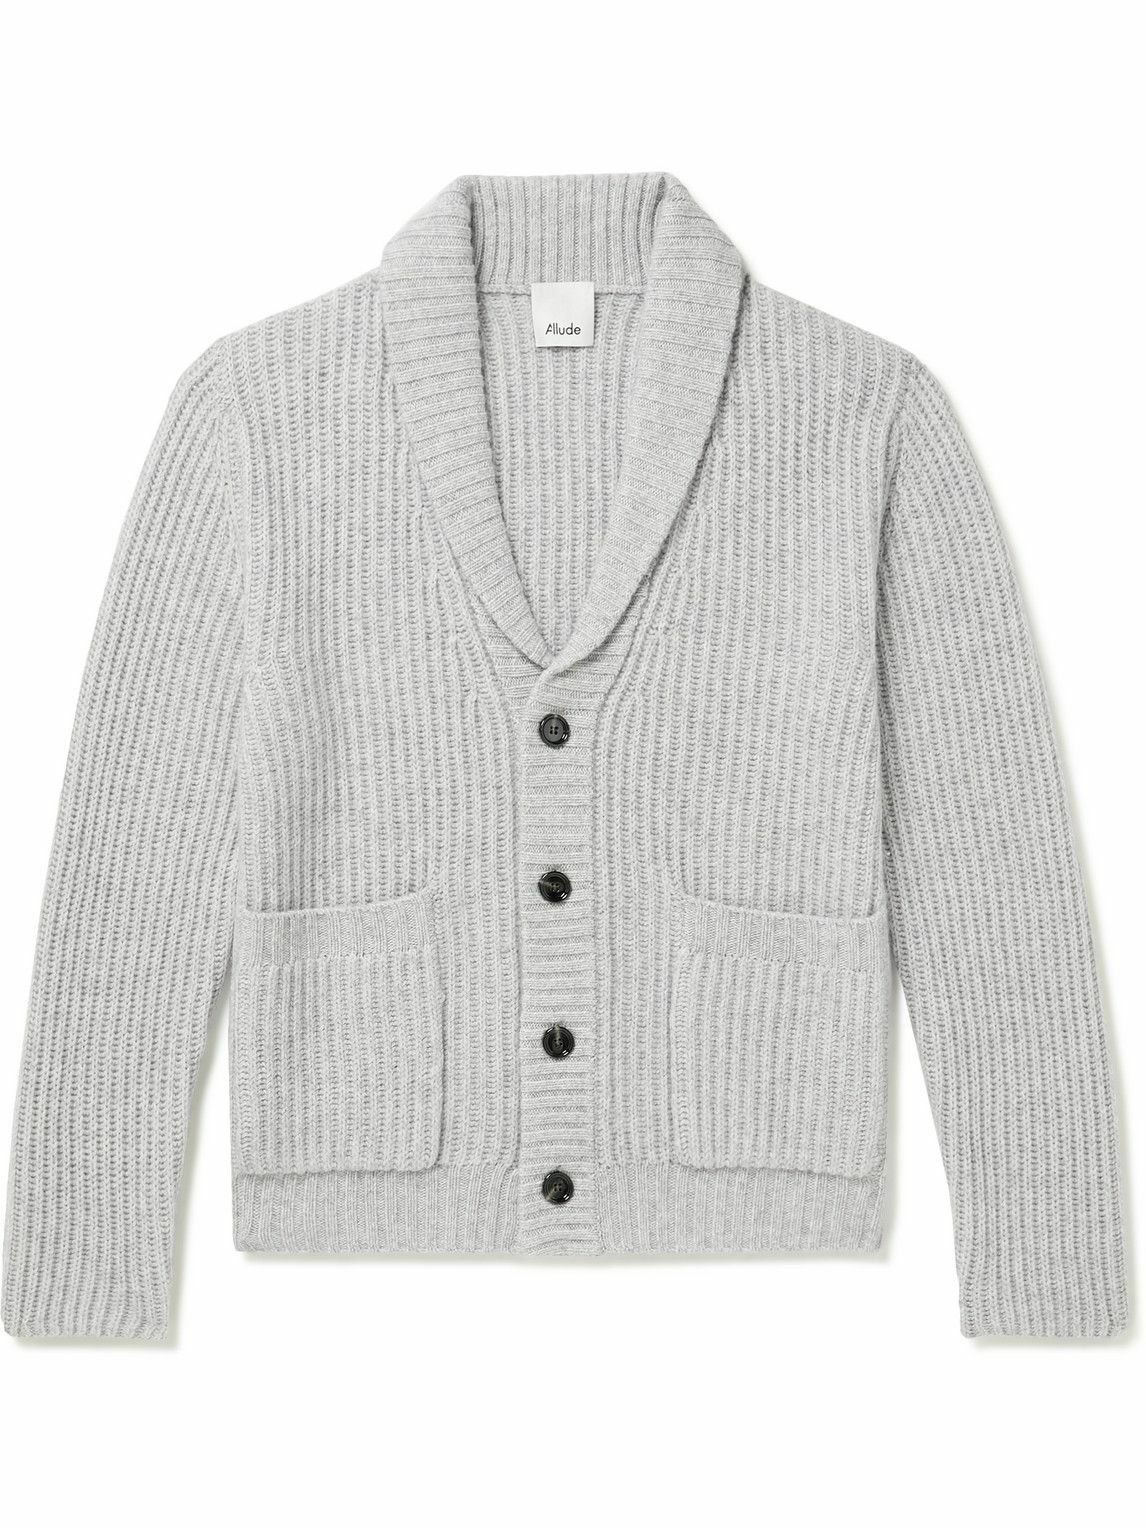 Allude - Shawl-Collar Ribbed Wool and Cashmere-Blend Cardigan - Gray